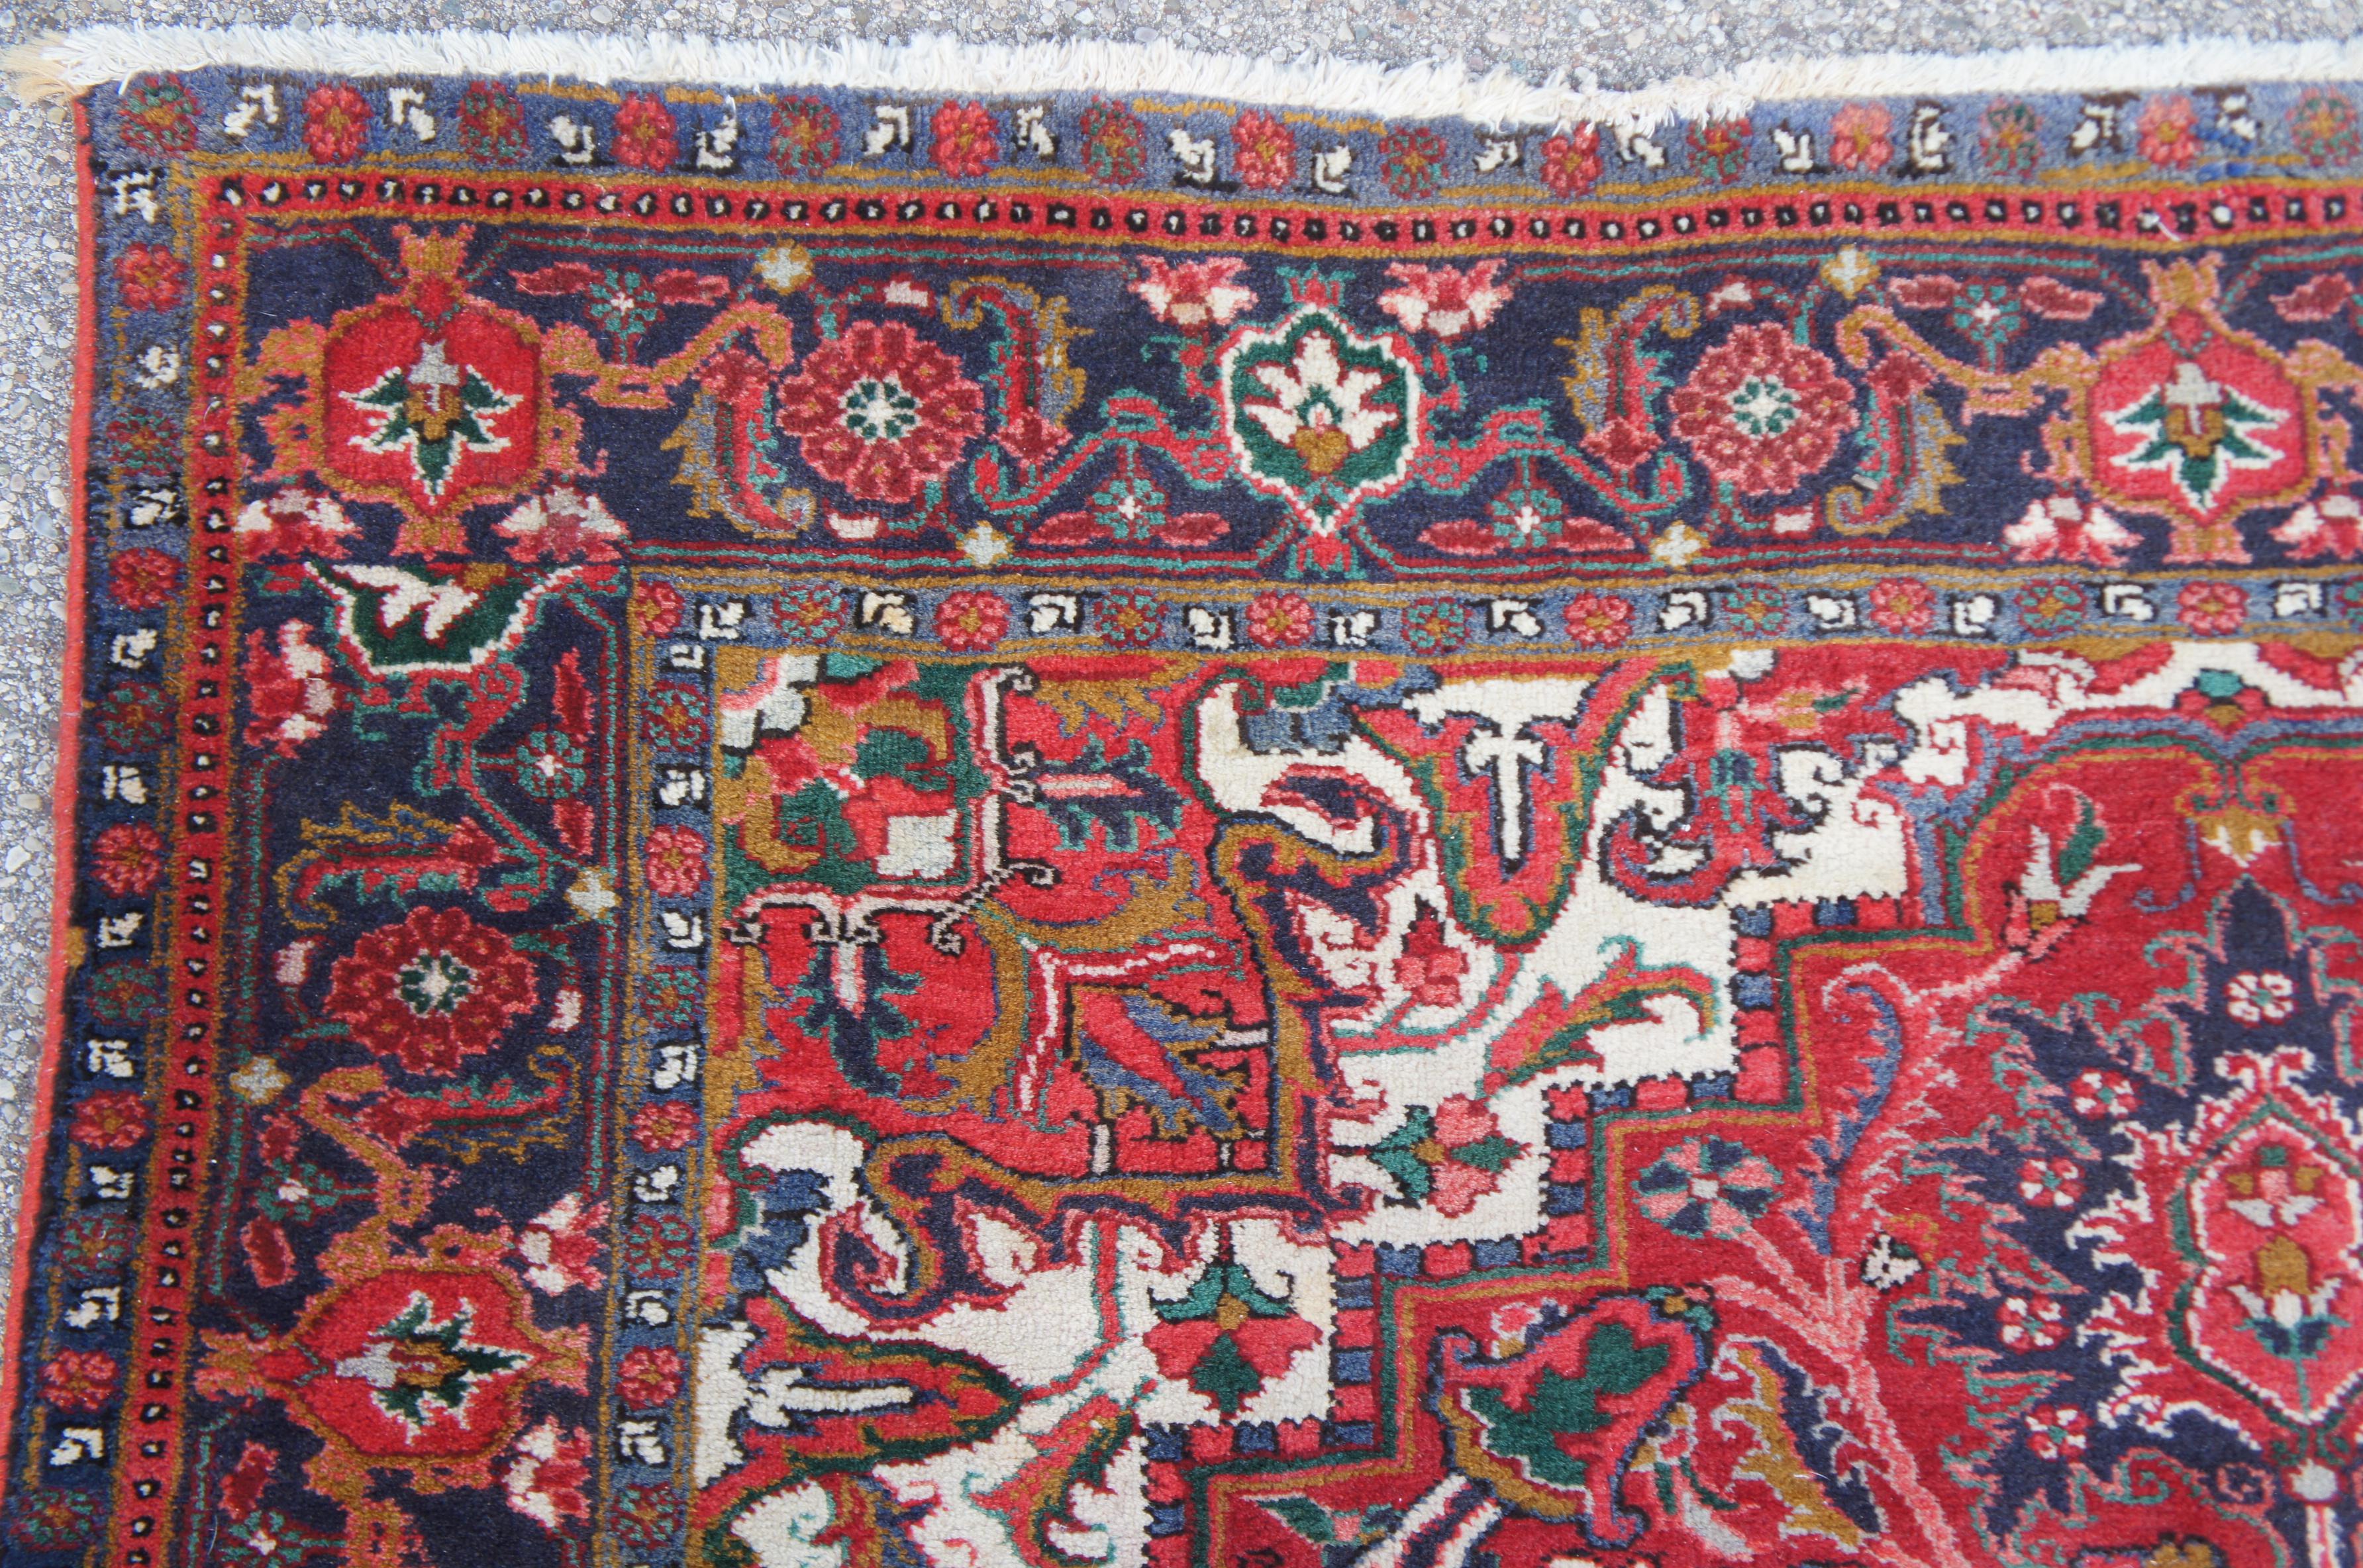 1985 Bakhtiar Iran 100% Wool Floral Medallion Area Rug Carpet In Good Condition For Sale In Dayton, OH